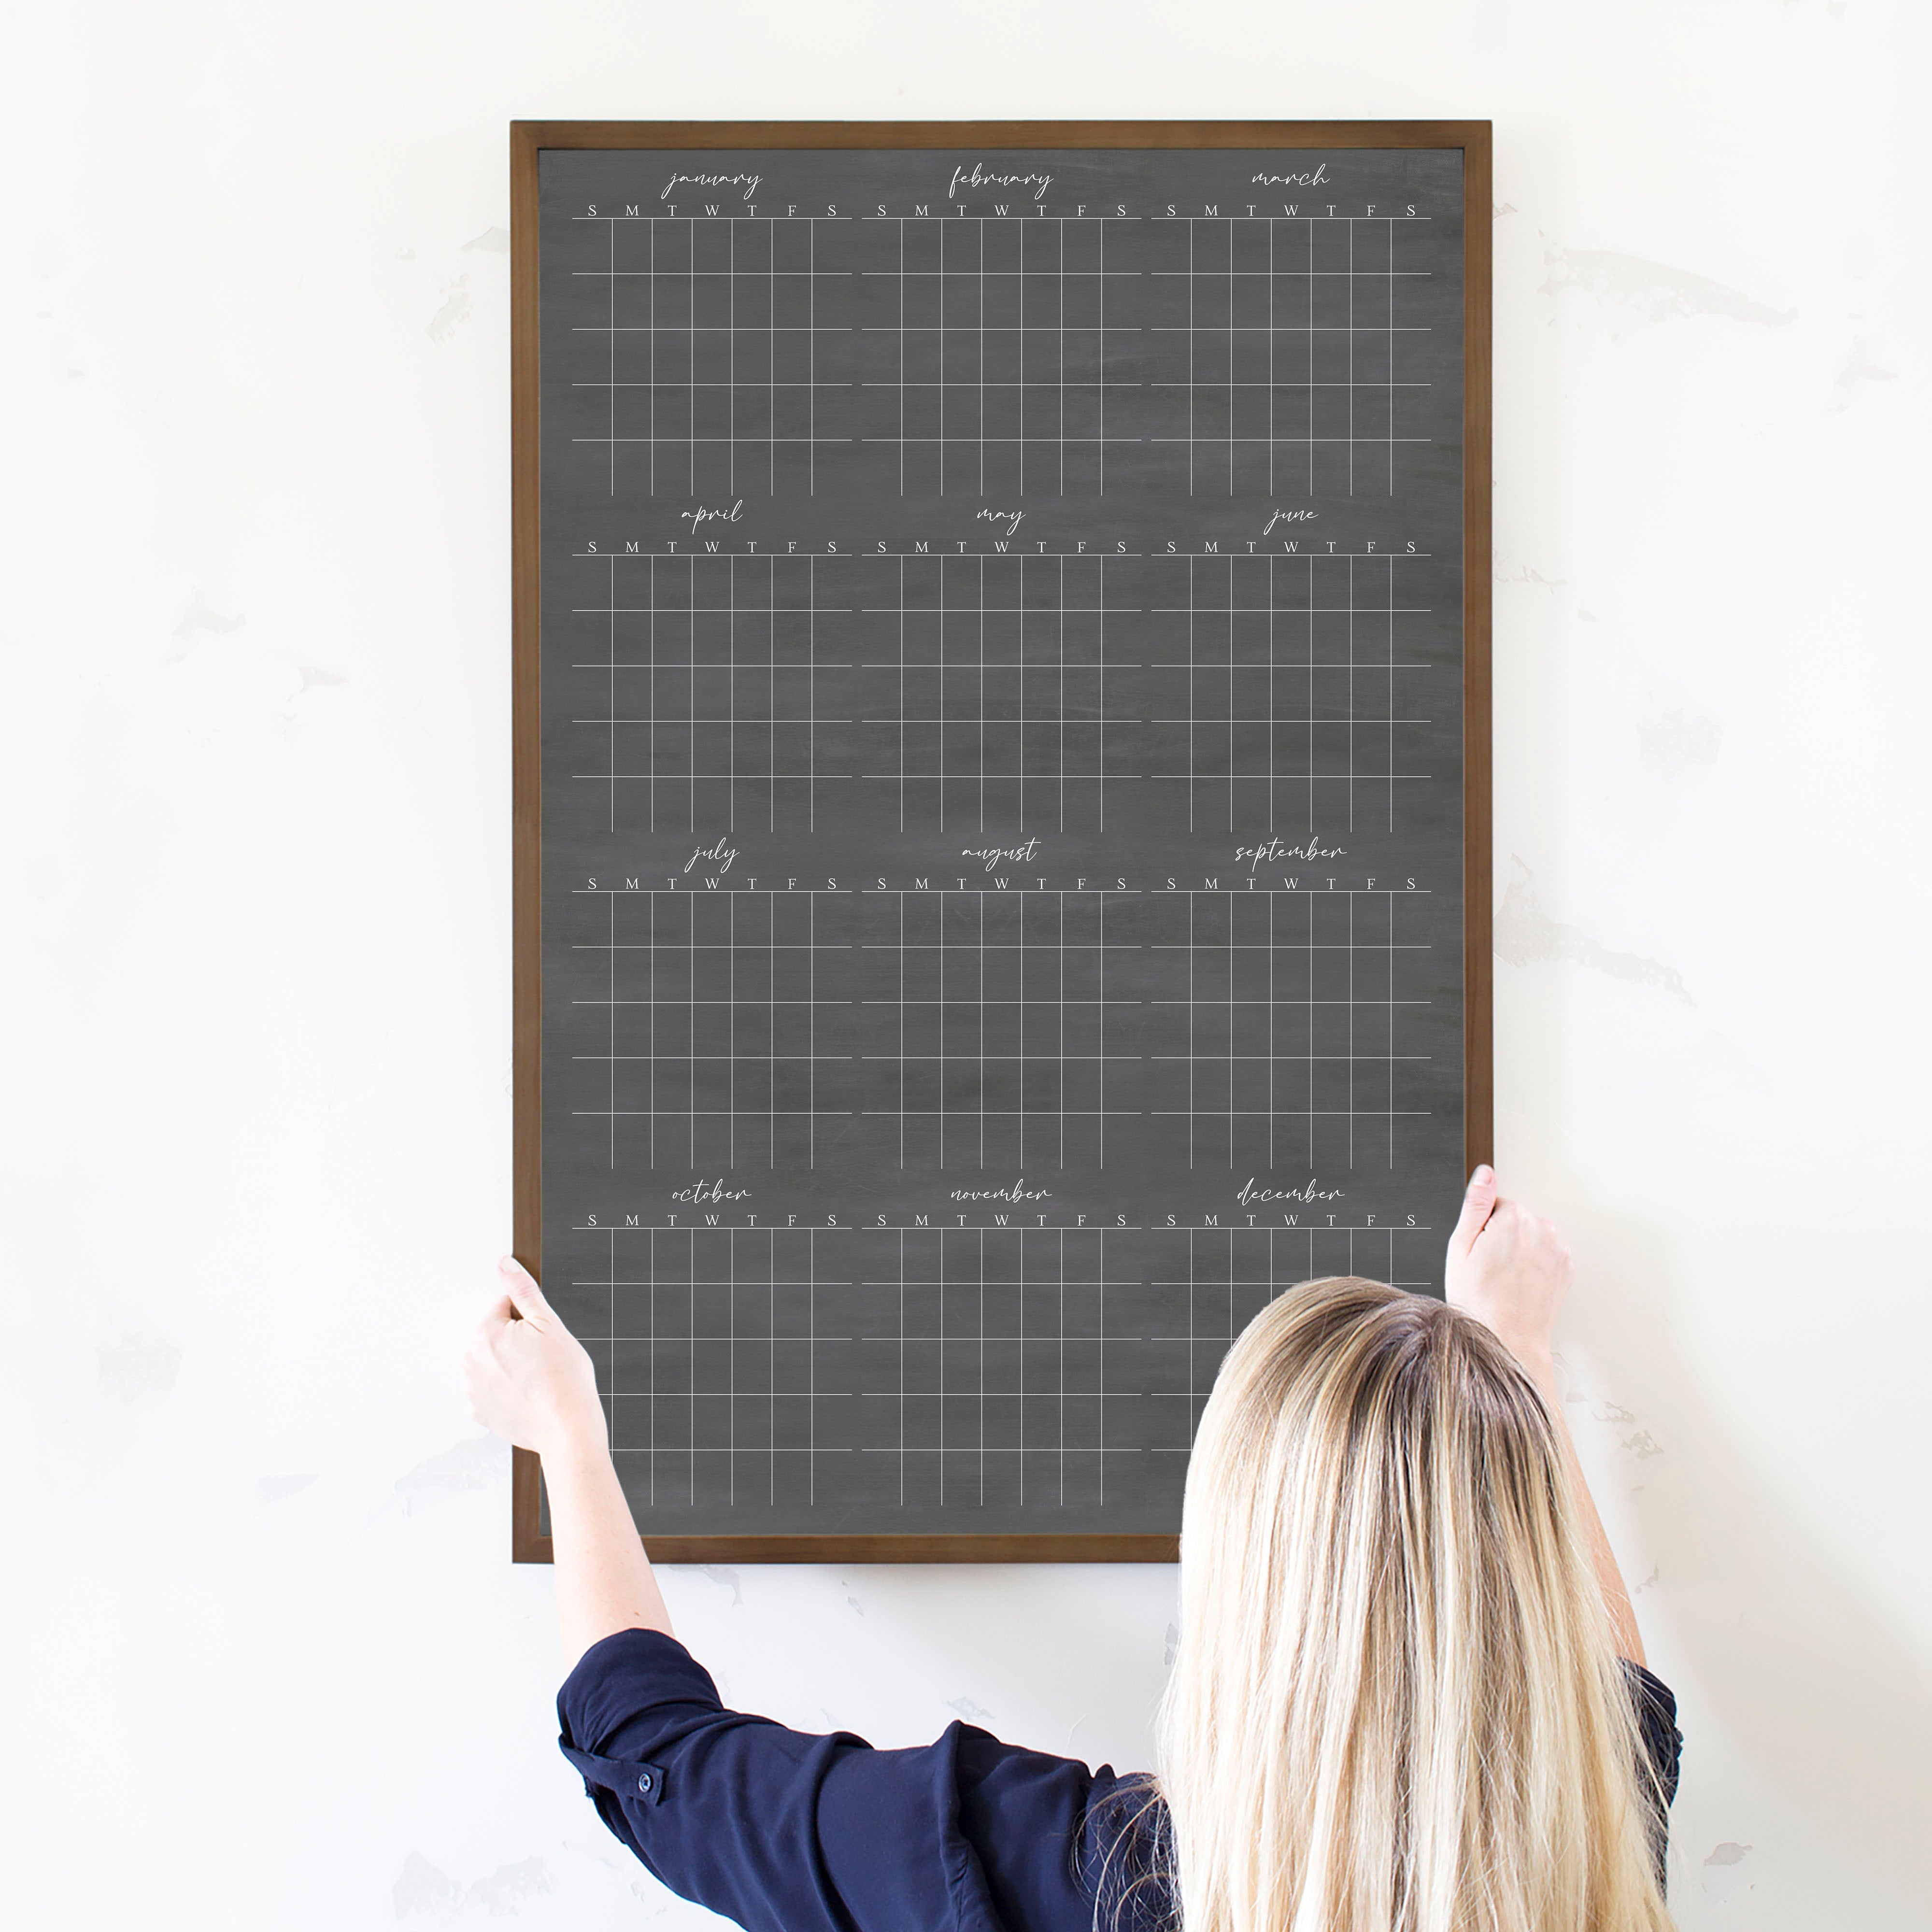 A framed dry-erase yearly calendar with a chalkboard look hanging up on the wall